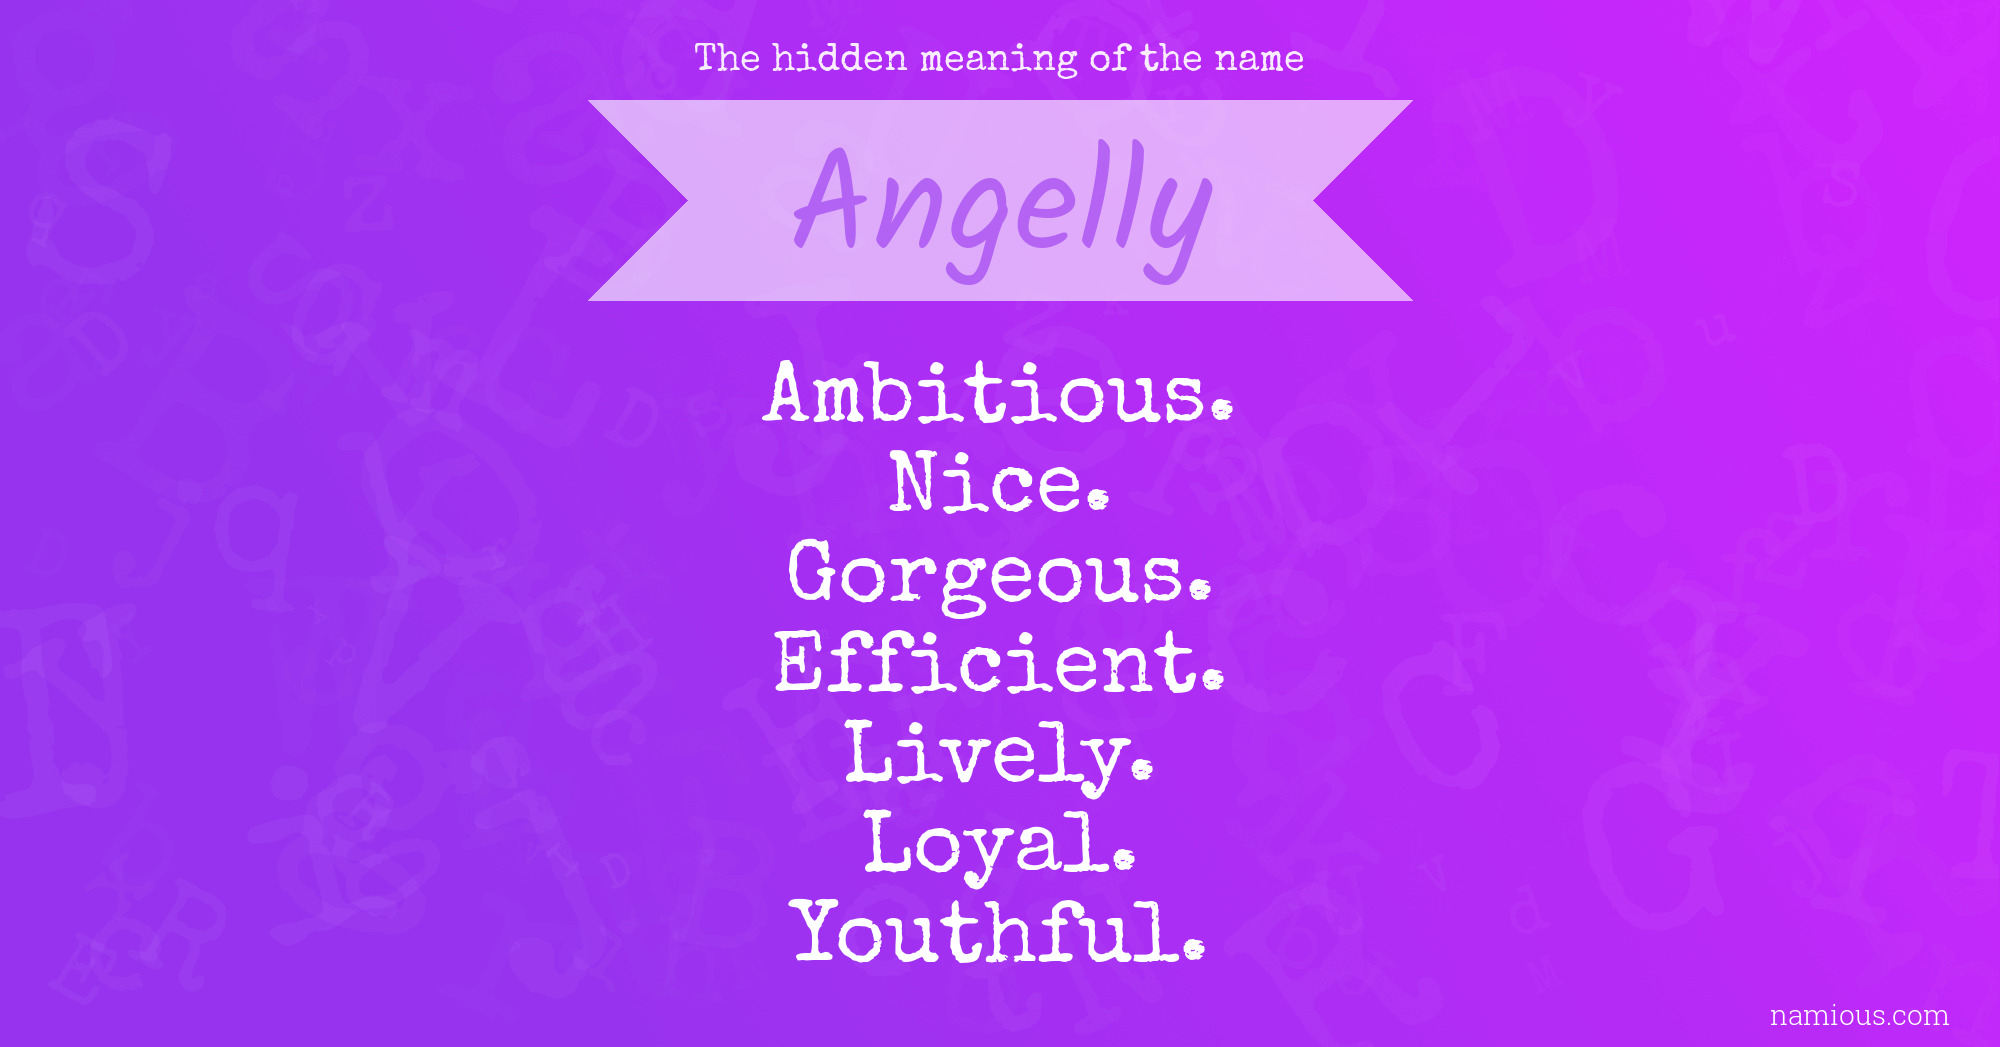 The hidden meaning of the name Angelly